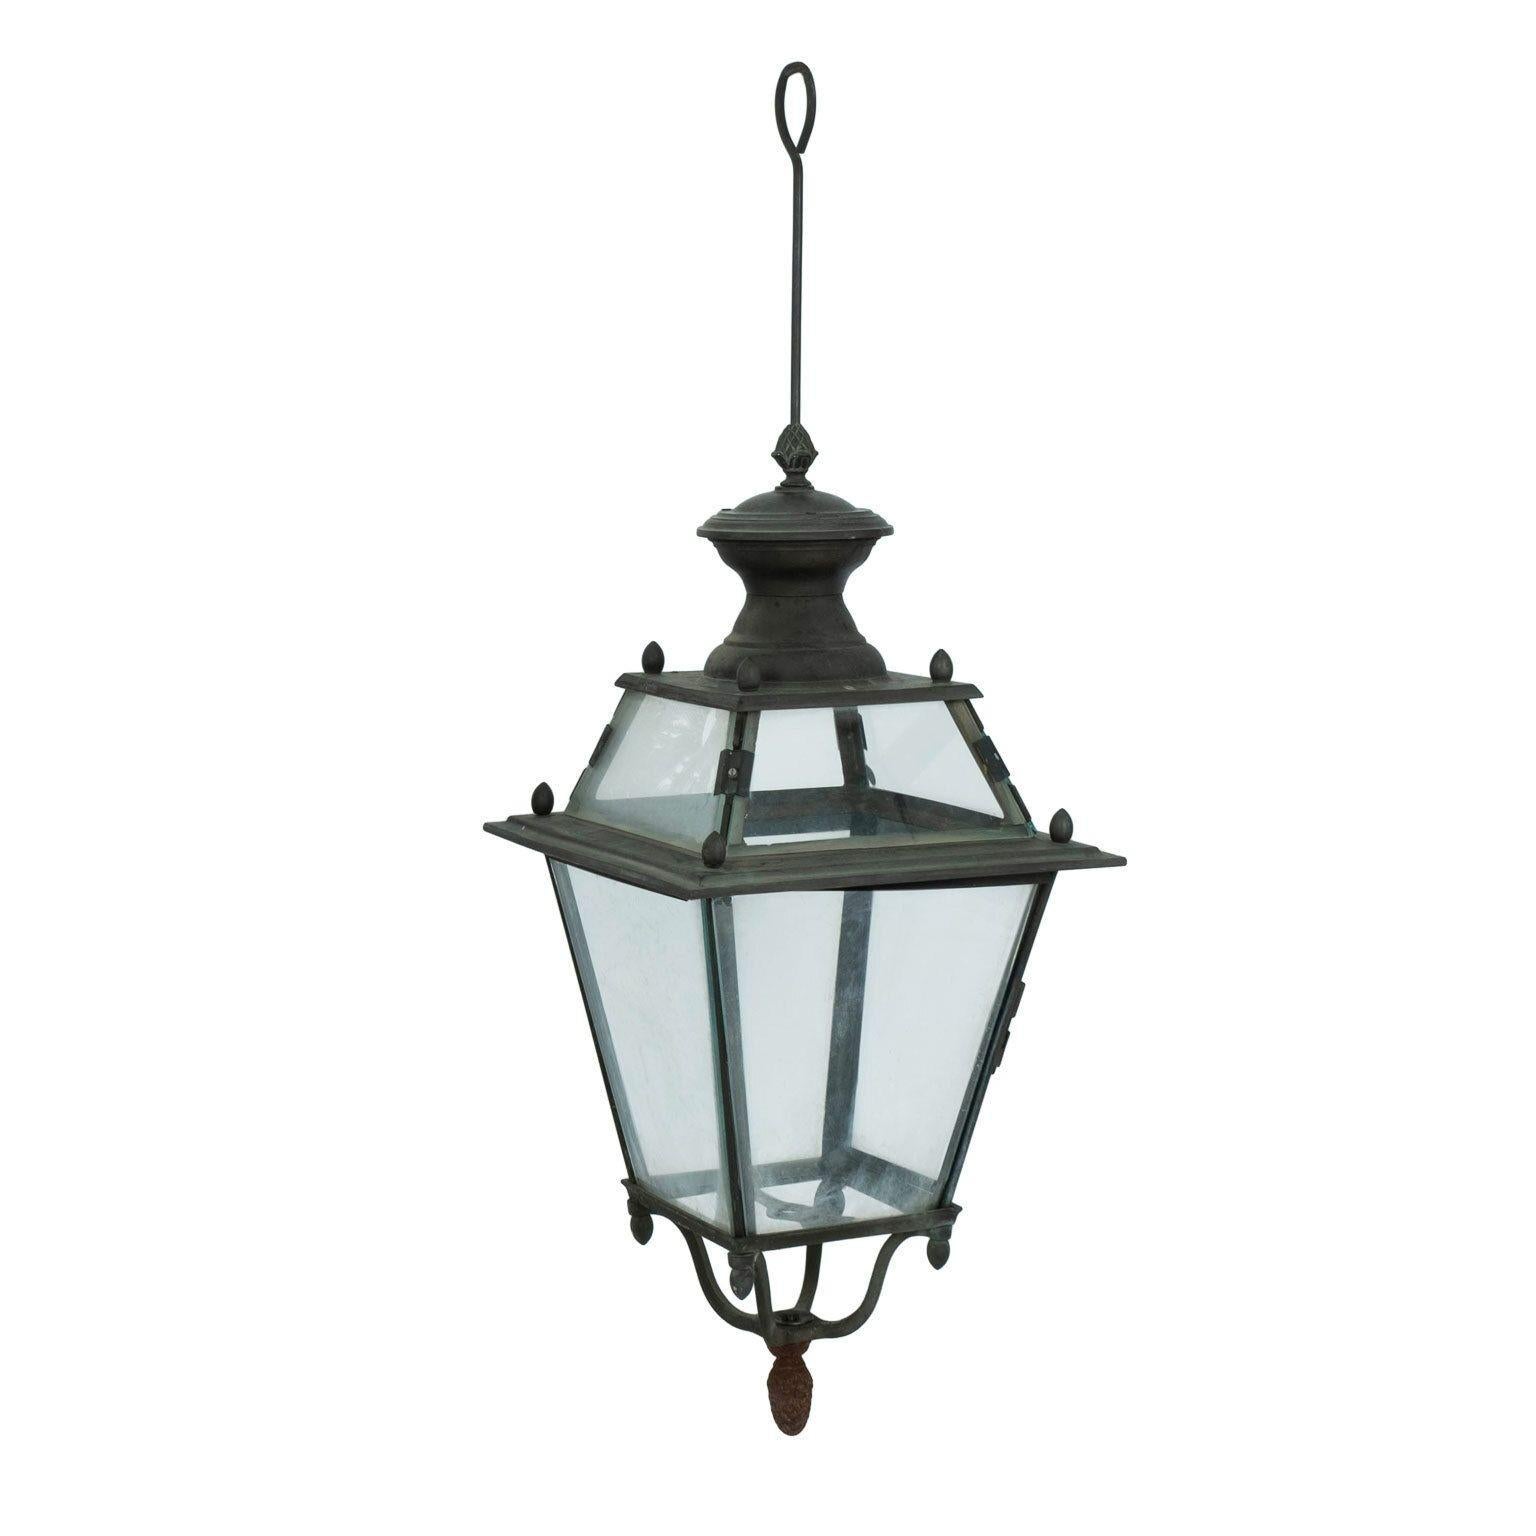 French Provincial French Iron and Tole Glass-Paneled Lantern